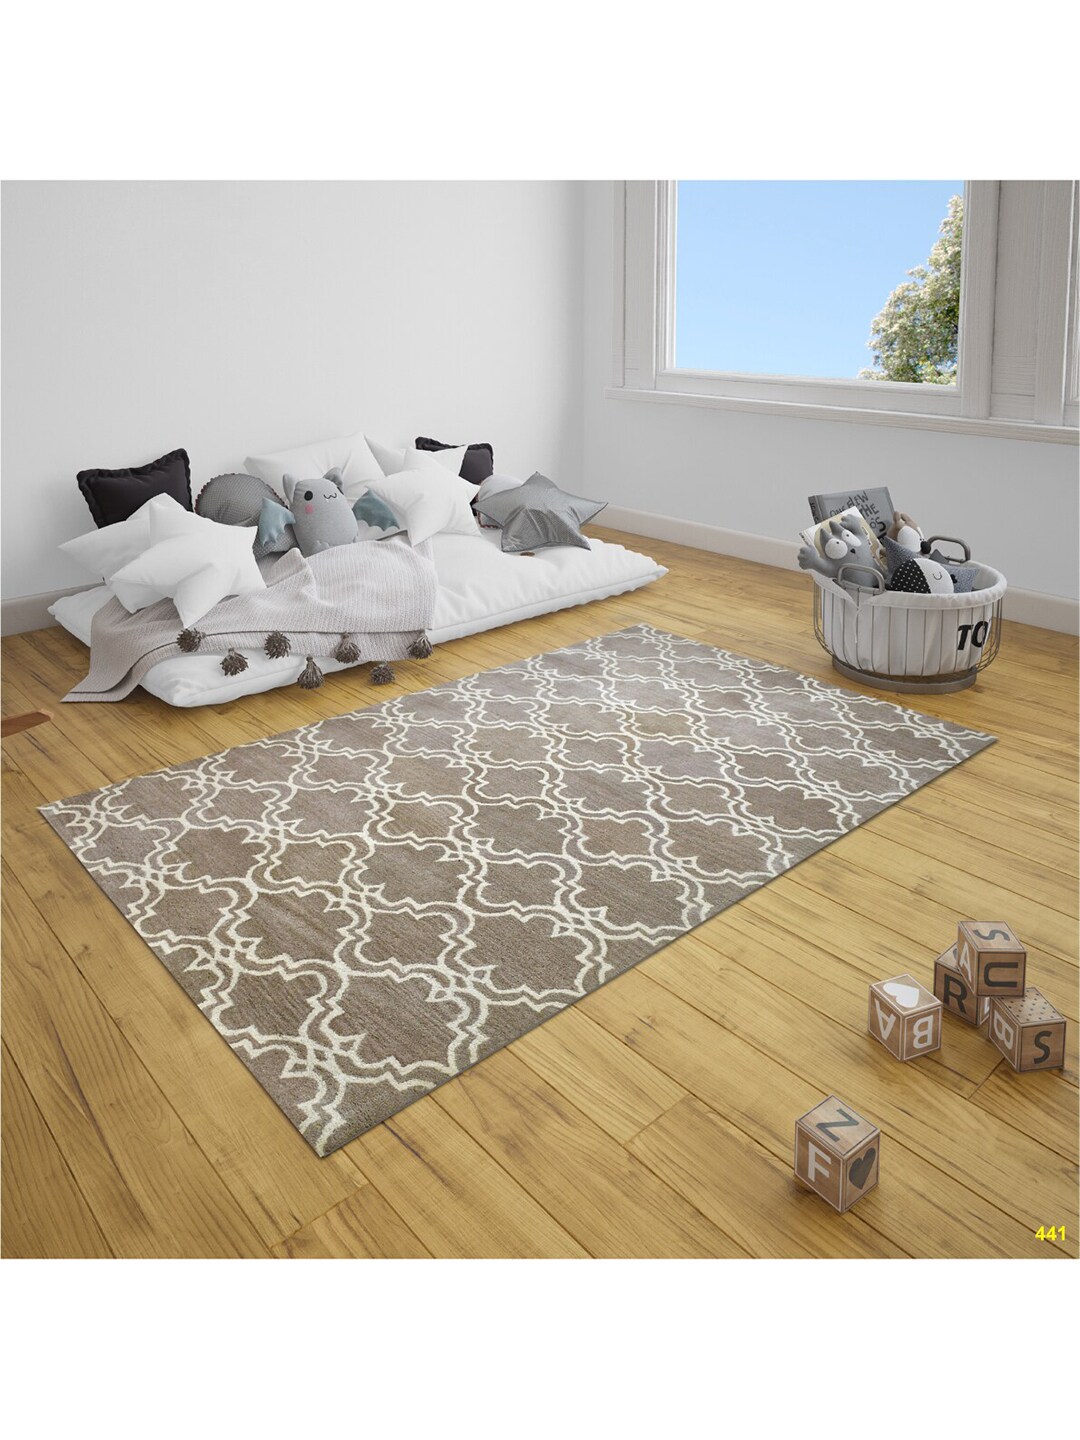 SANDED EDGE Brown & Off-White Hand Tufted Woolen Floor Carpet Price in India